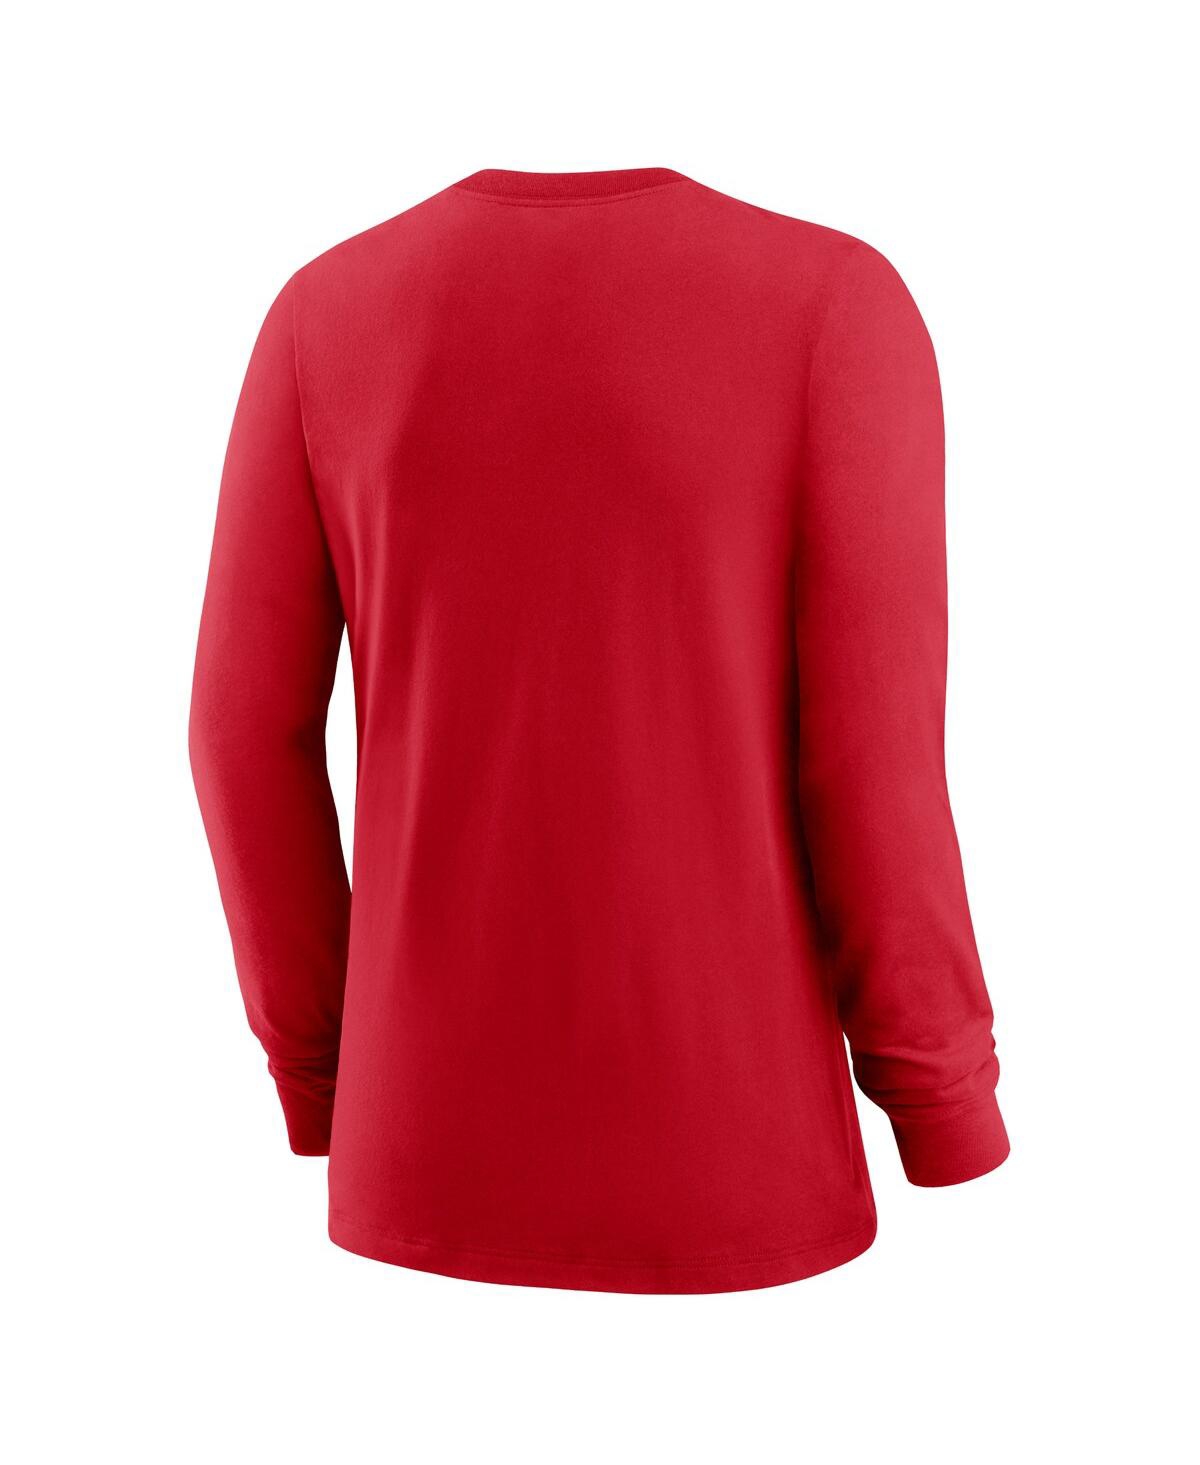 Shop Nike Women's  Red Los Angeles Angels Authentic Collection Legend Performance Long Sleeve T-shirt